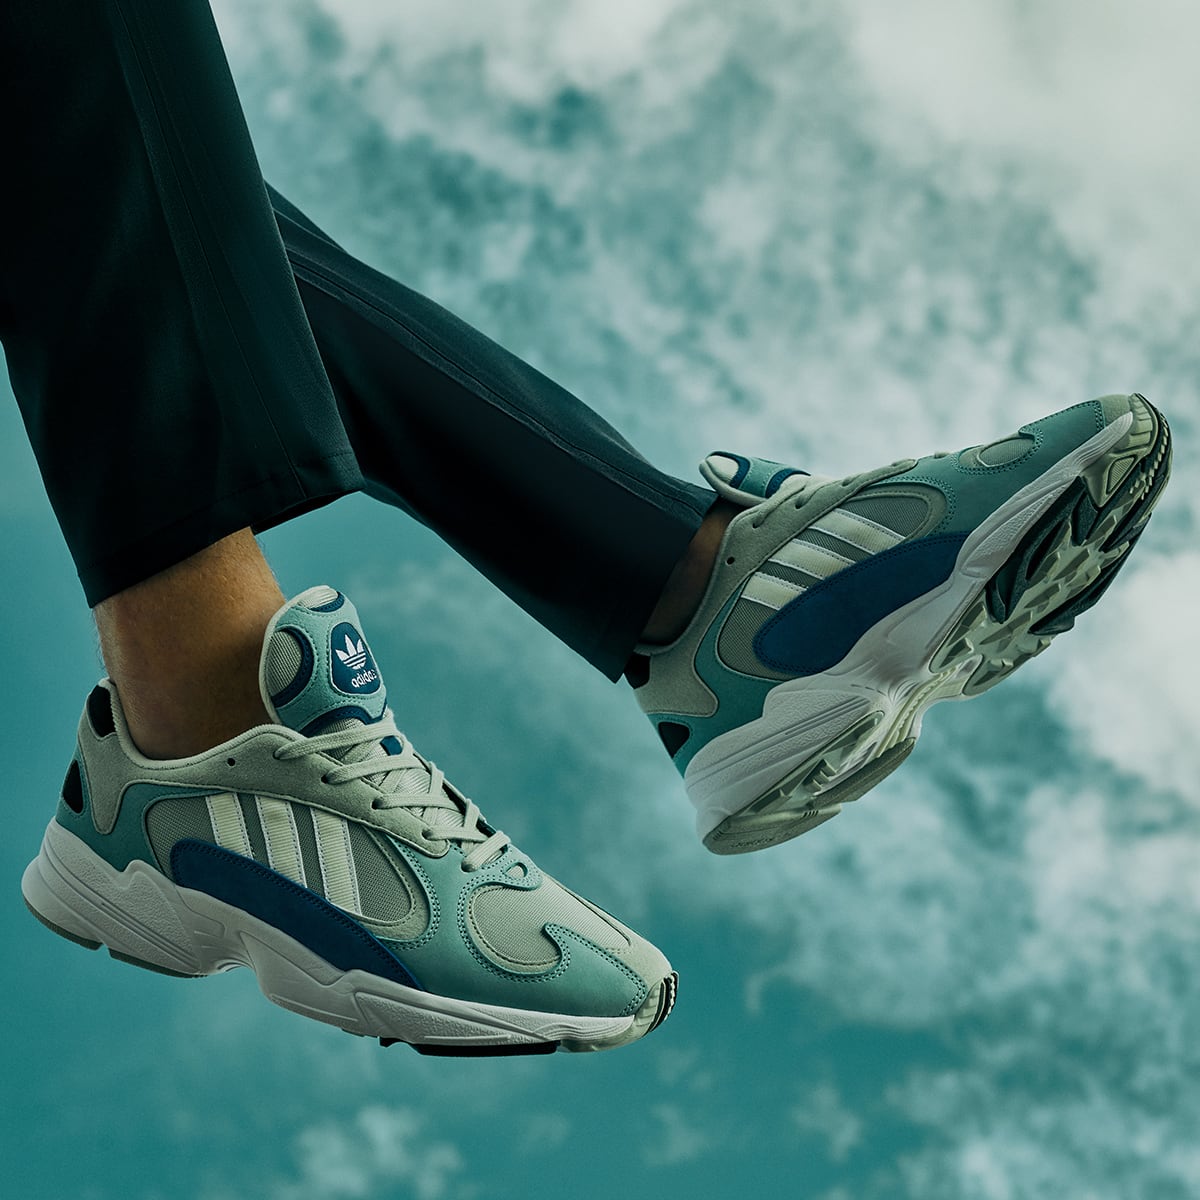 adidas yung 1 end atmosphere